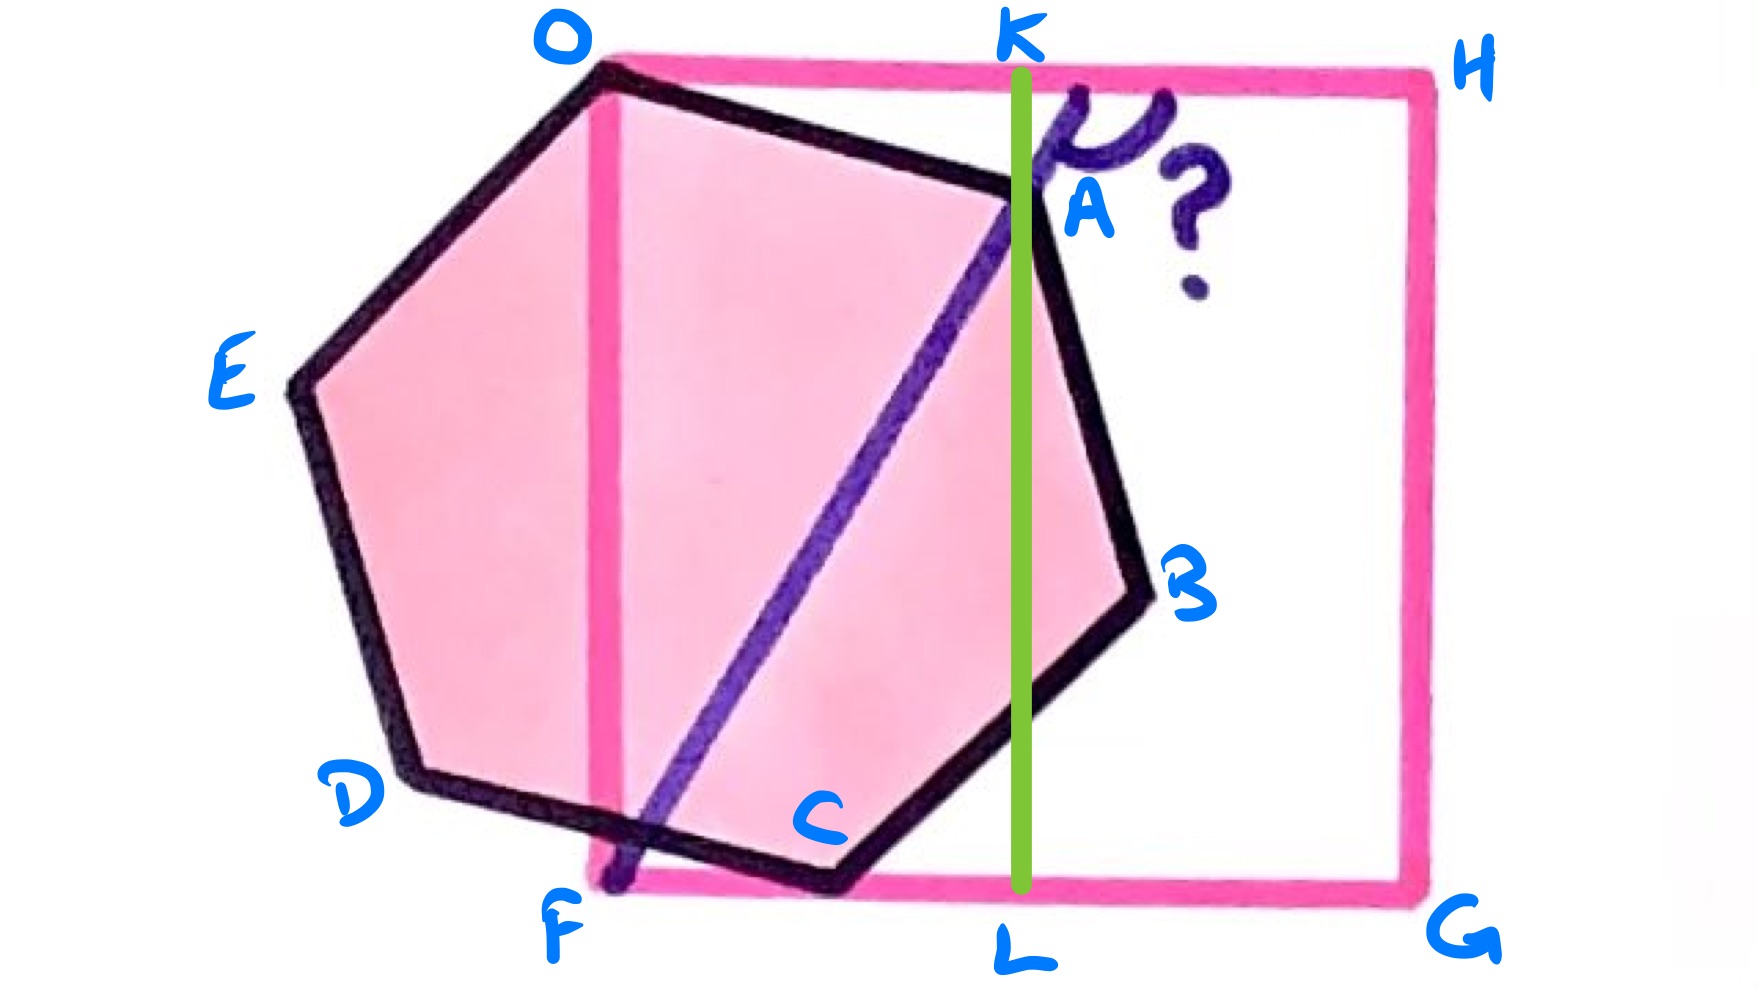 Labelled version of the hexagon and square diagram